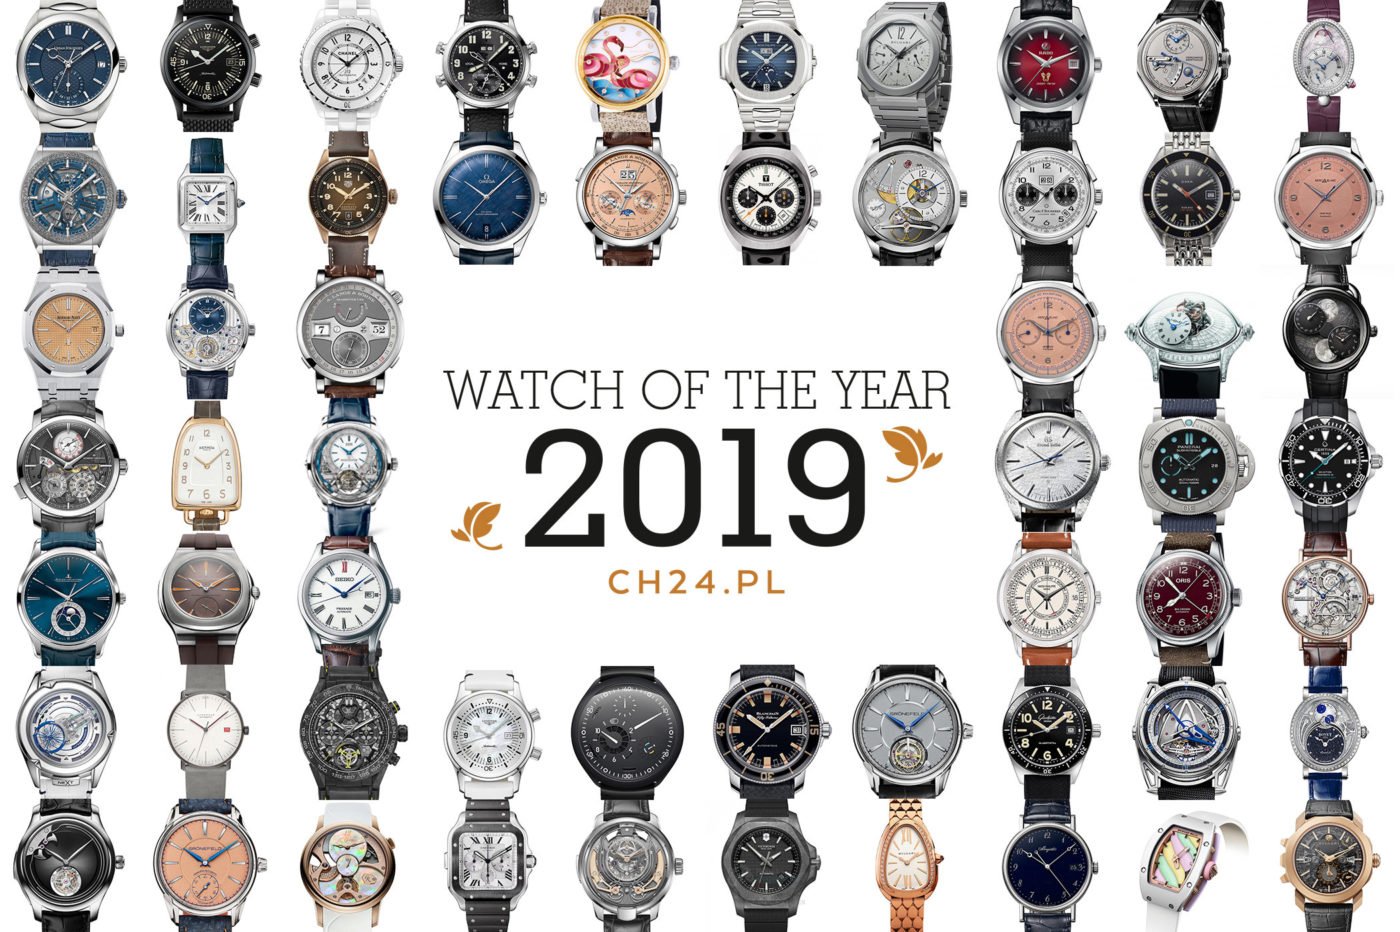 Watch Of The Year 2019